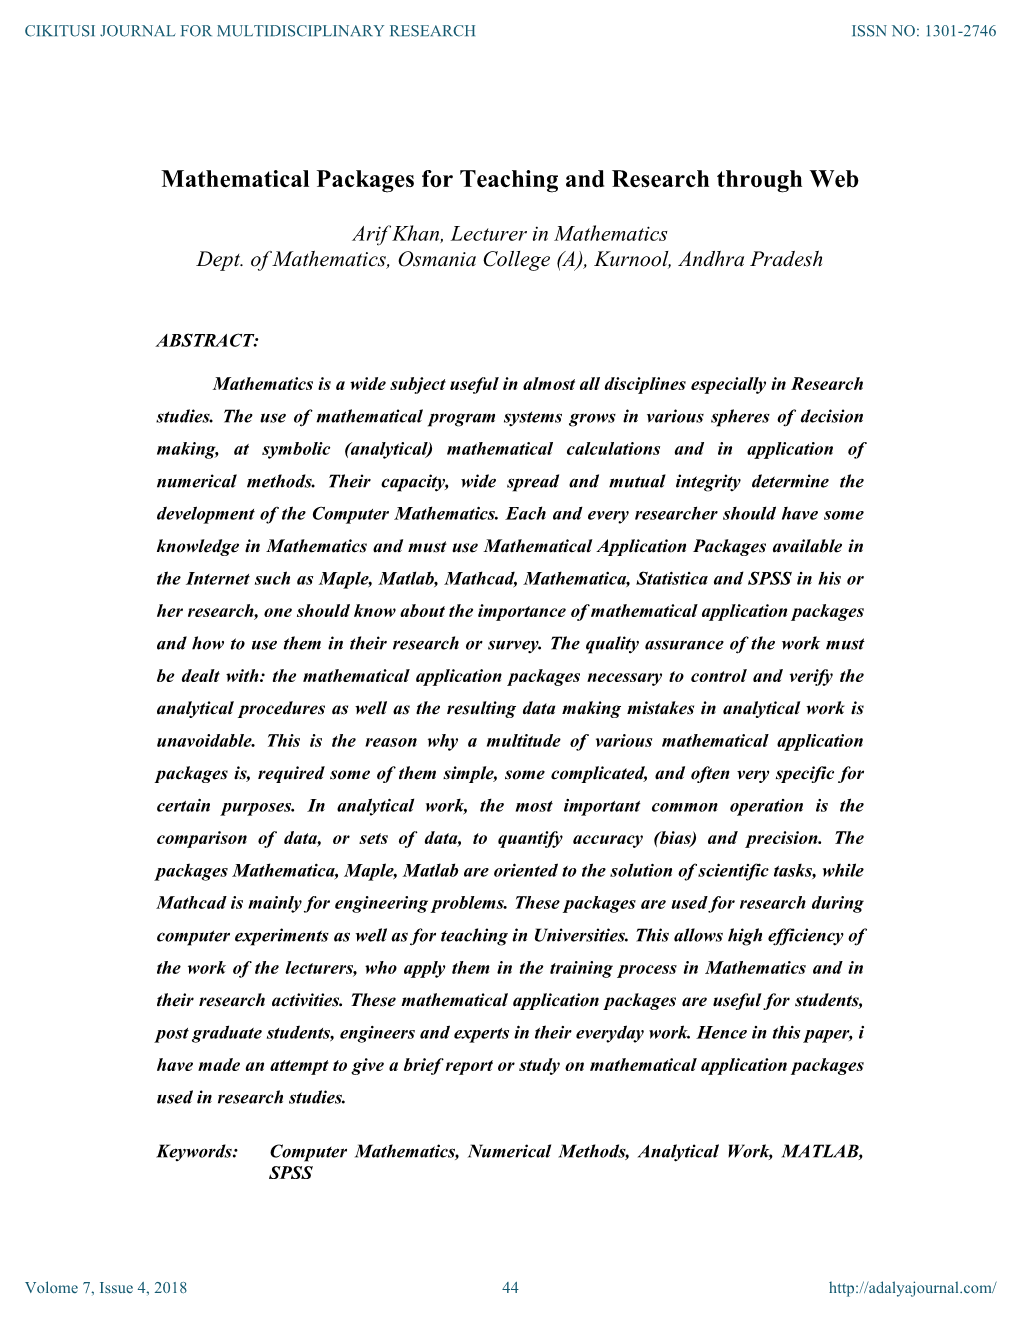 Mathematical Packages for Teaching and Research Through Web